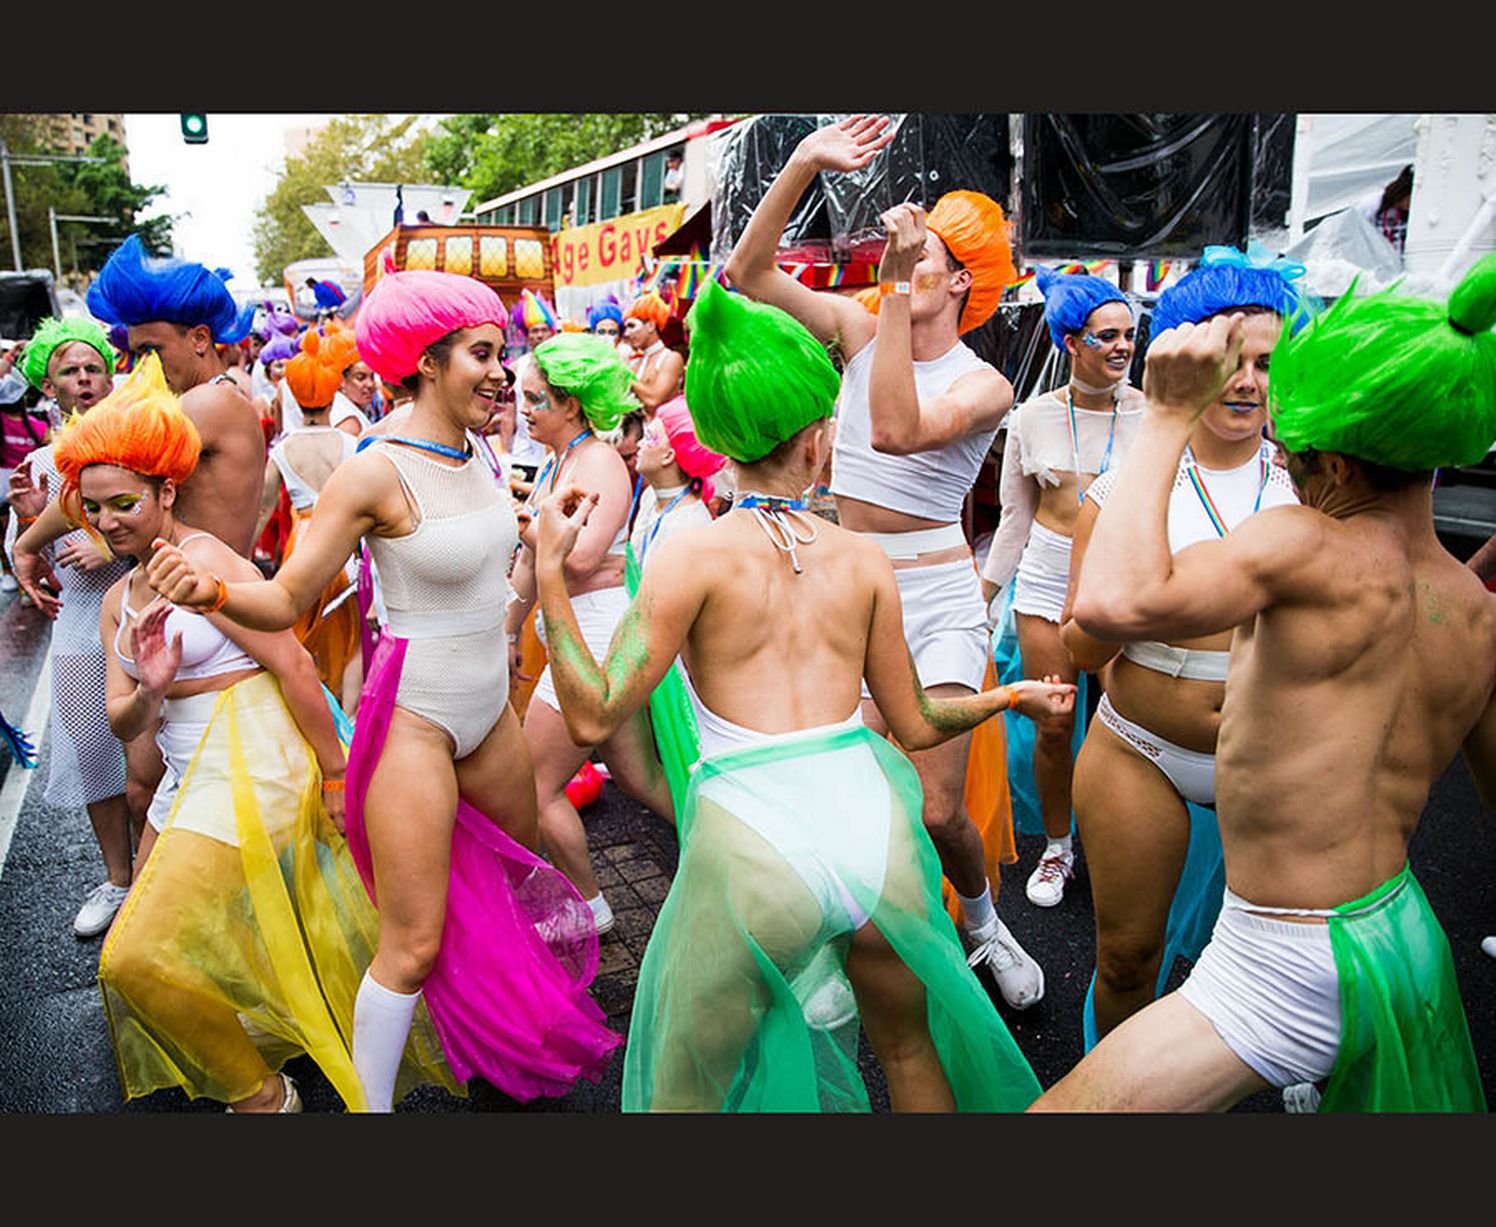 cortney wilkerson recommends naked at mardi gras pic